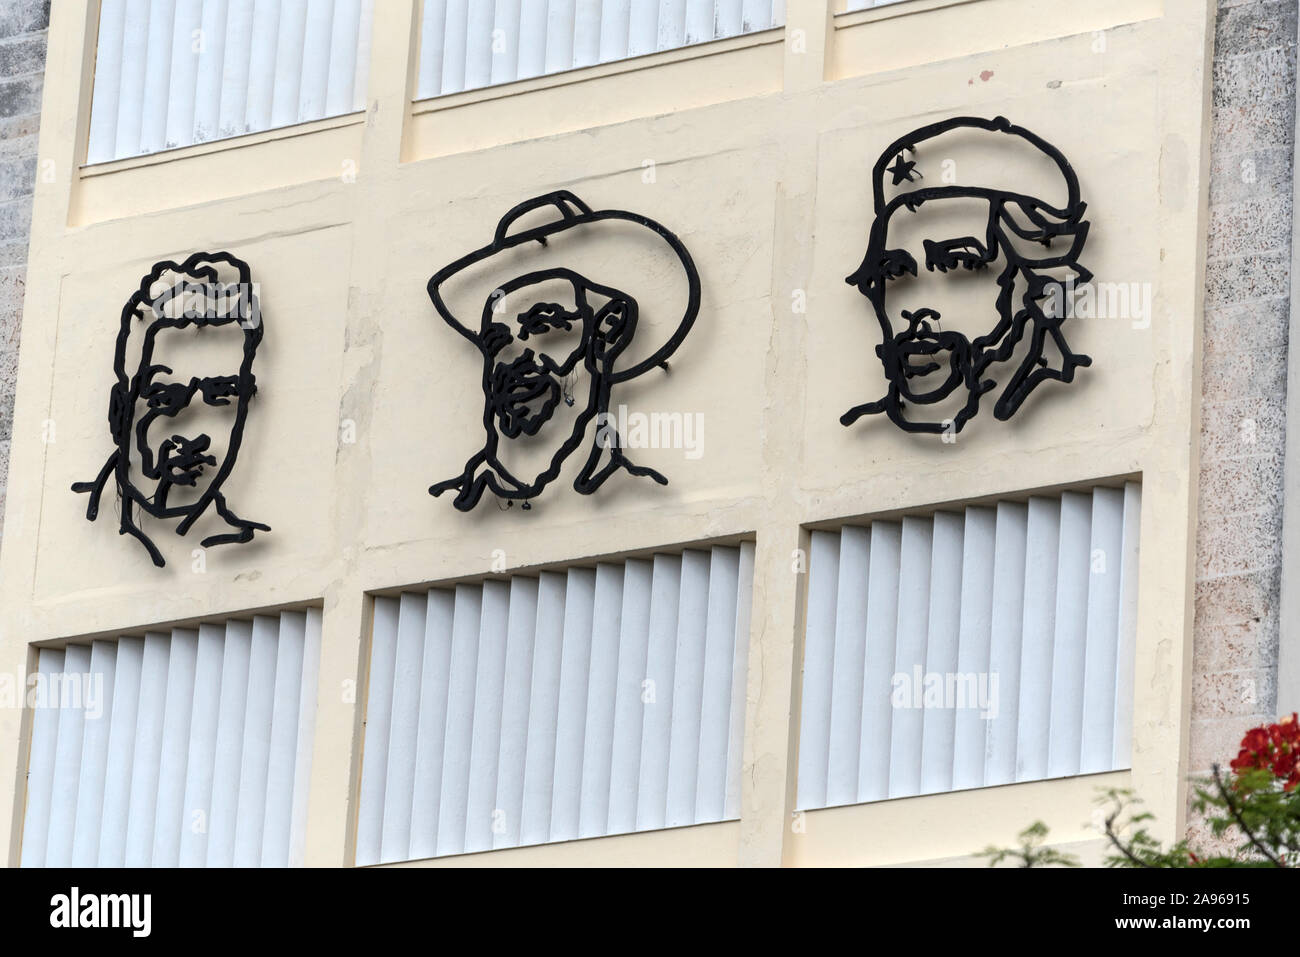 The three stylized portraits of three were heroes of the Cuban Revolution, Julio Antonio Mella, Camilo Cienfuegos and Che Guevara, high up on the wall Stock Photo